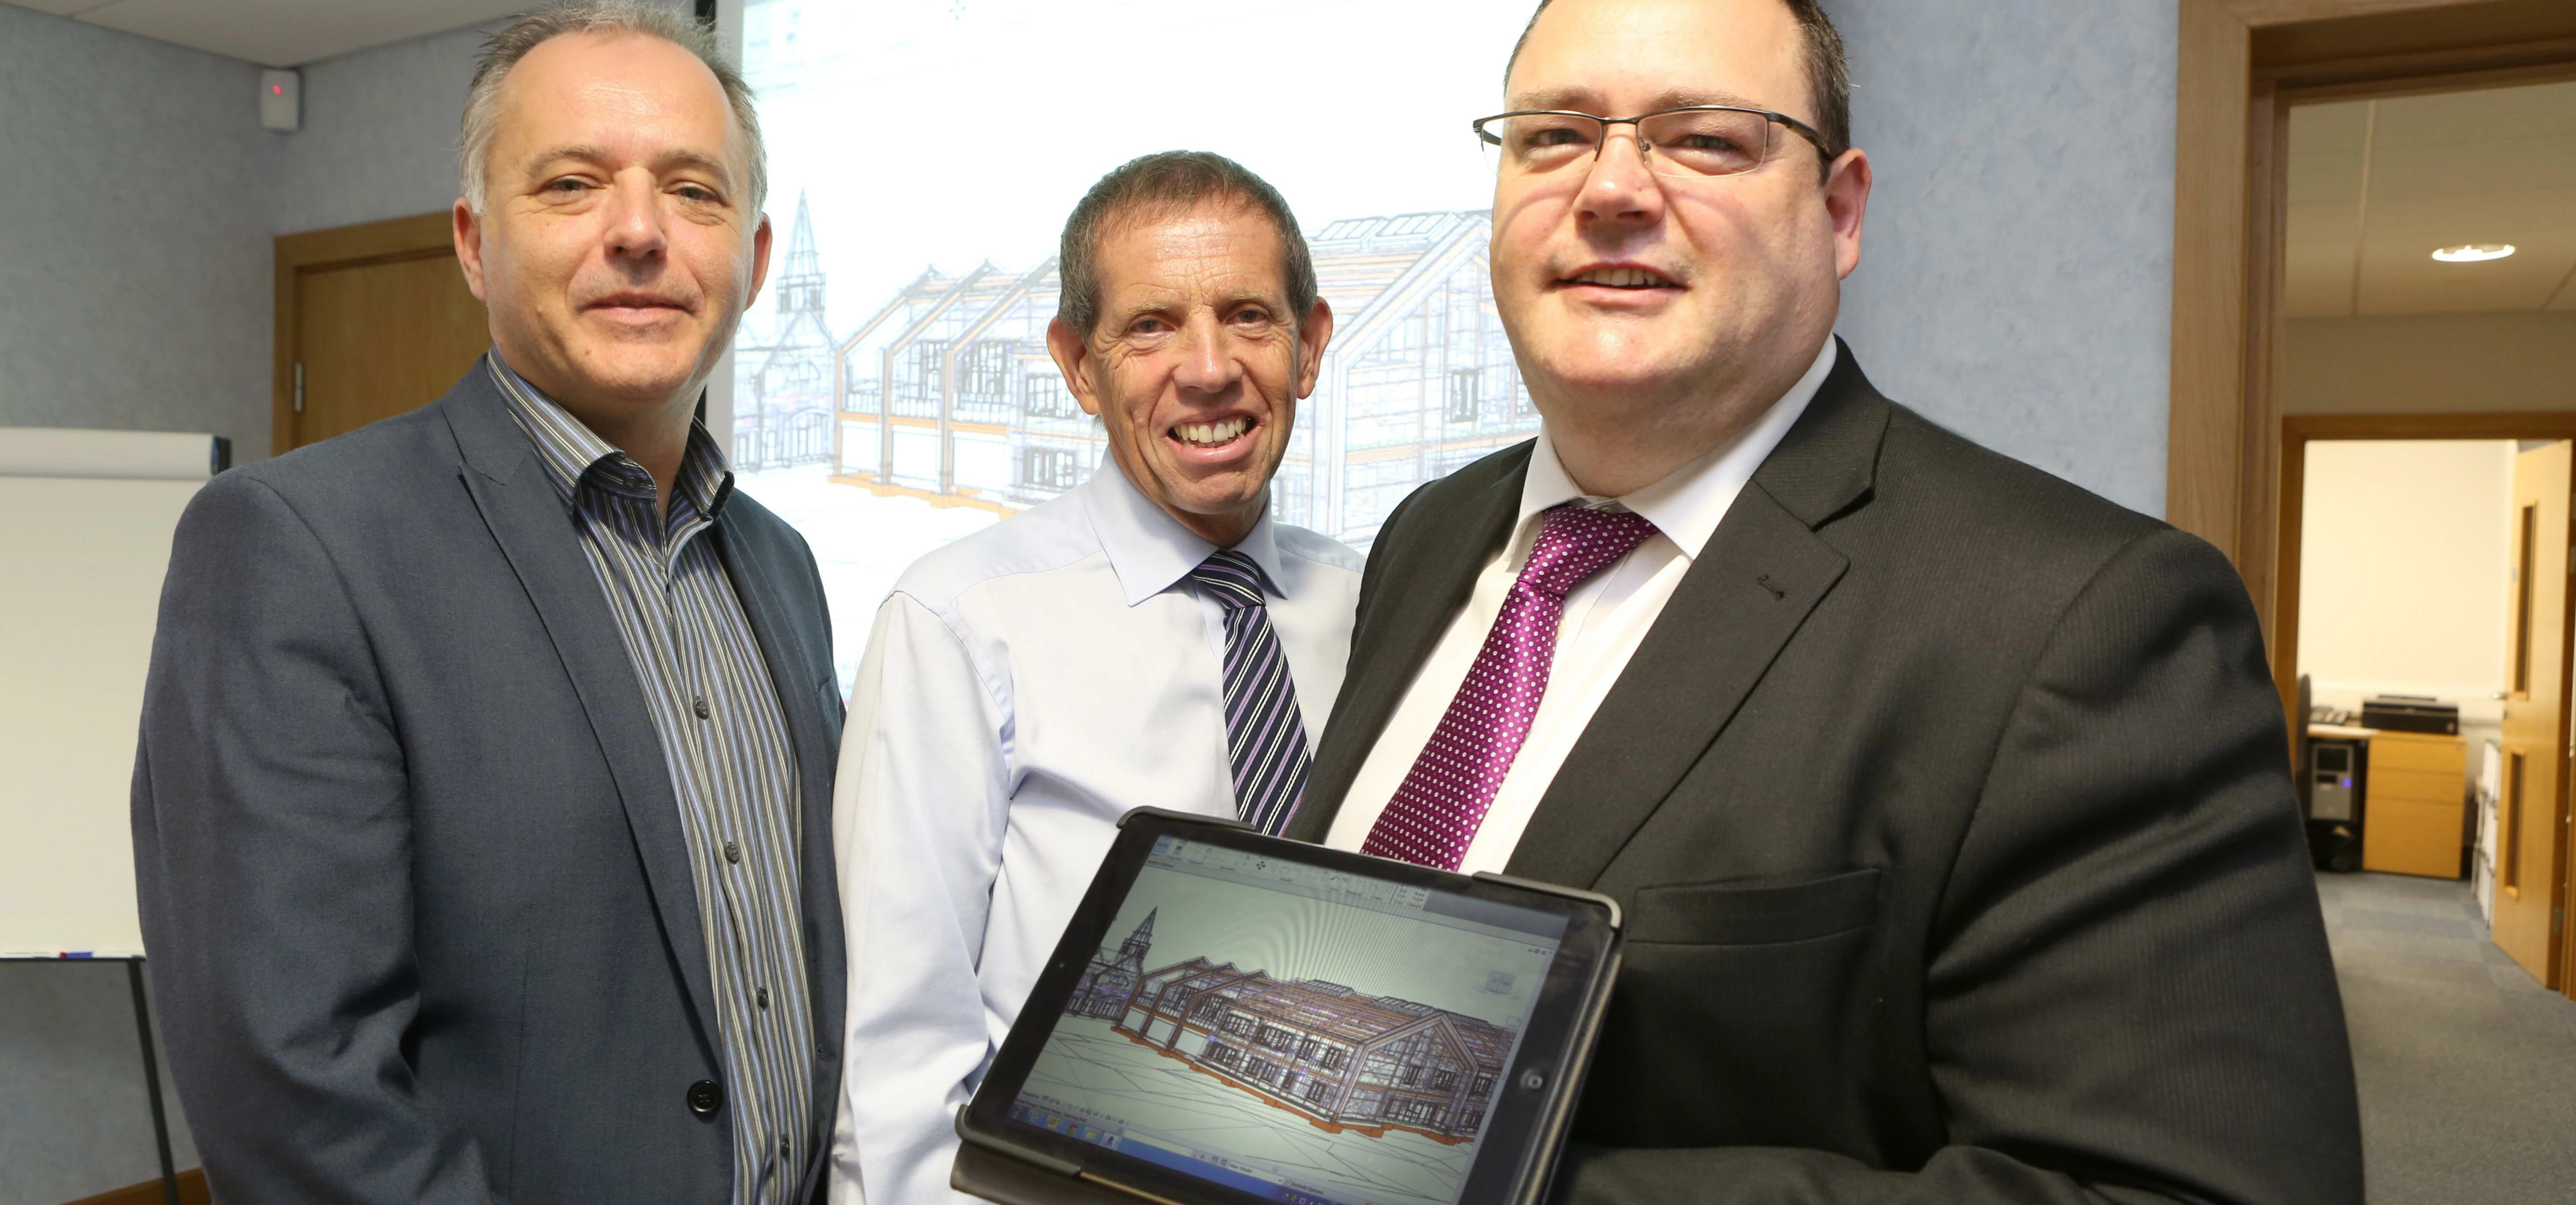 Gareth Thomas, architectural services manager for Anglesey County Council, Chris Wynne of Wynne Cons